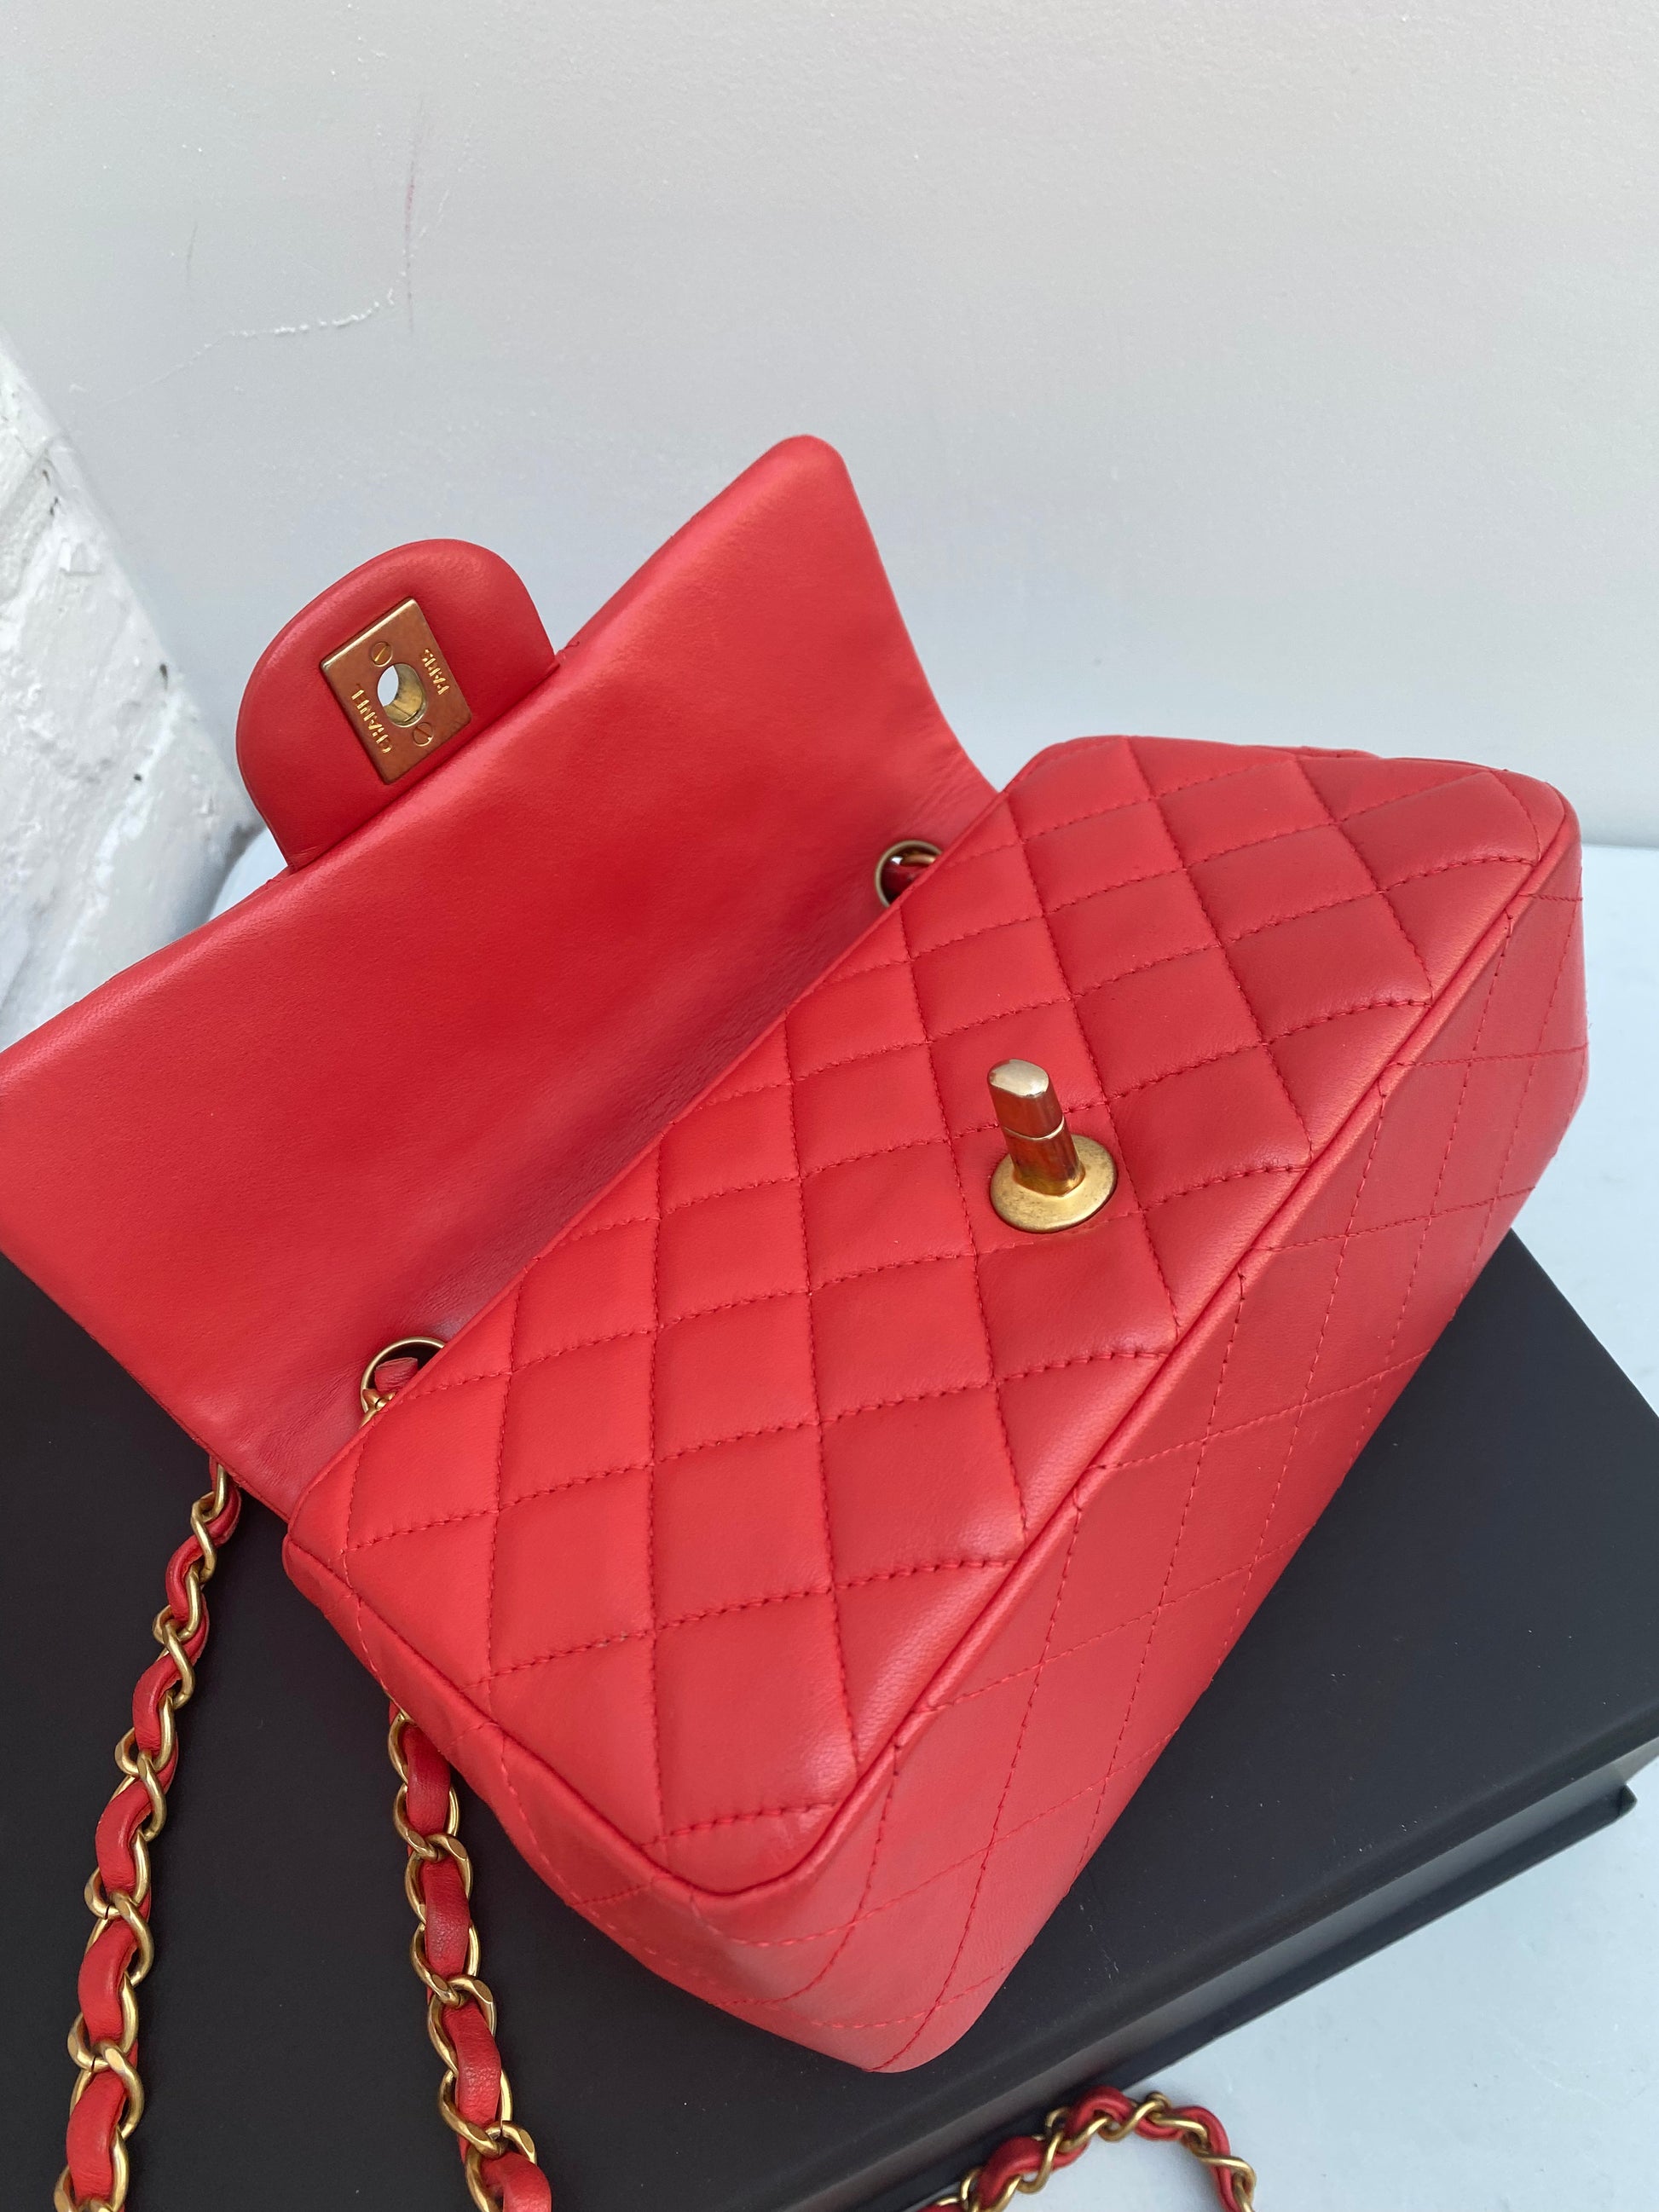 Chanel Boy Bag in Red Lambskin Leather with Gold Hardware — UFO No More